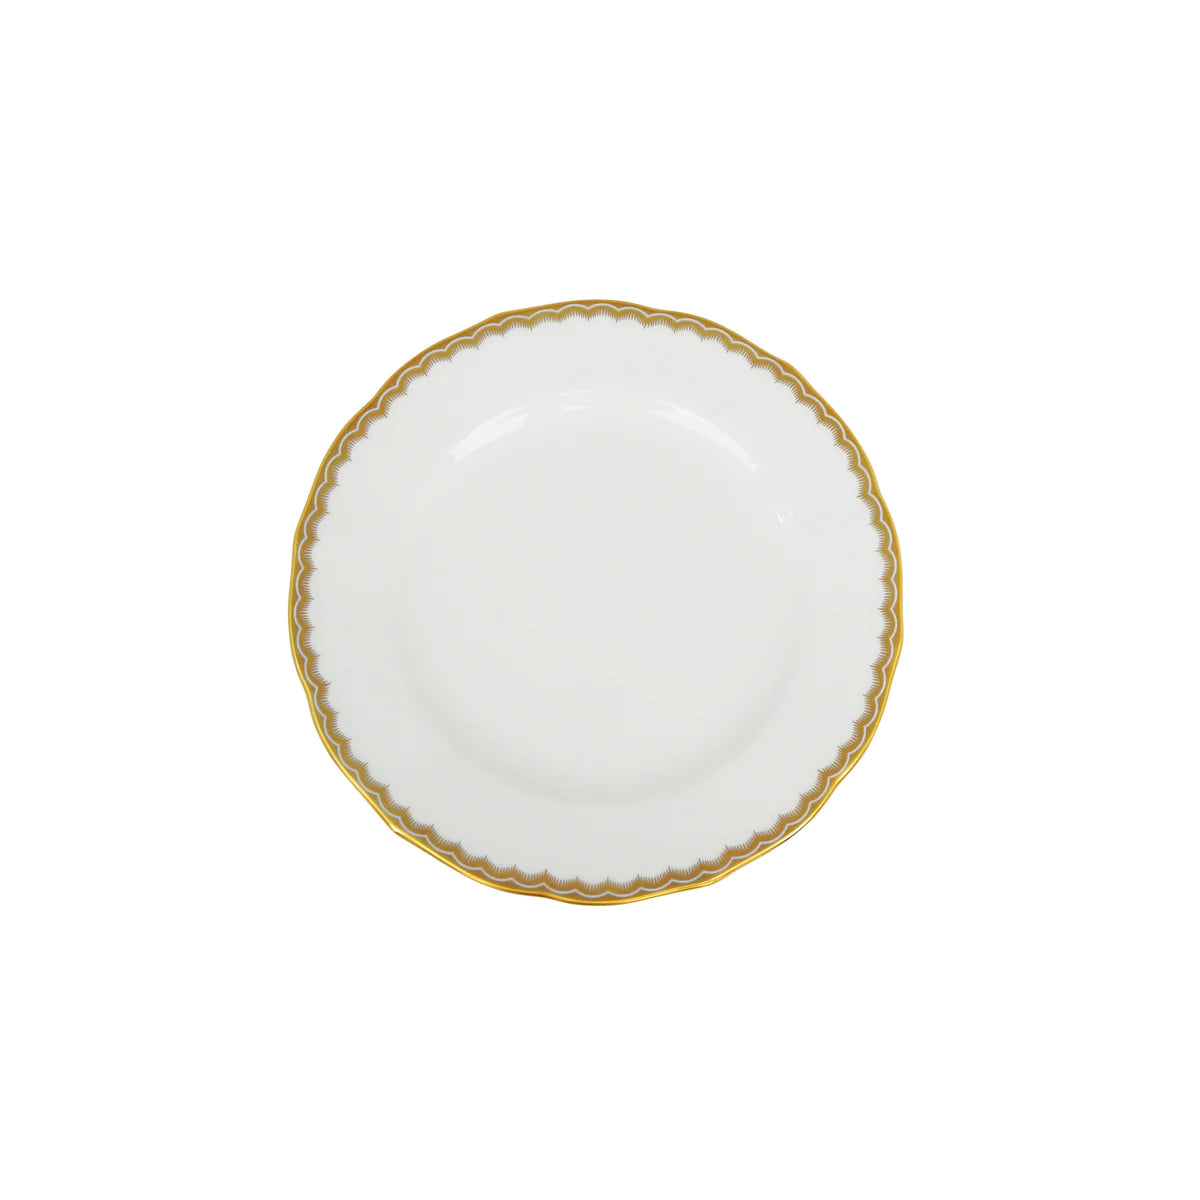 Antique Gold Bread & Butter Plate